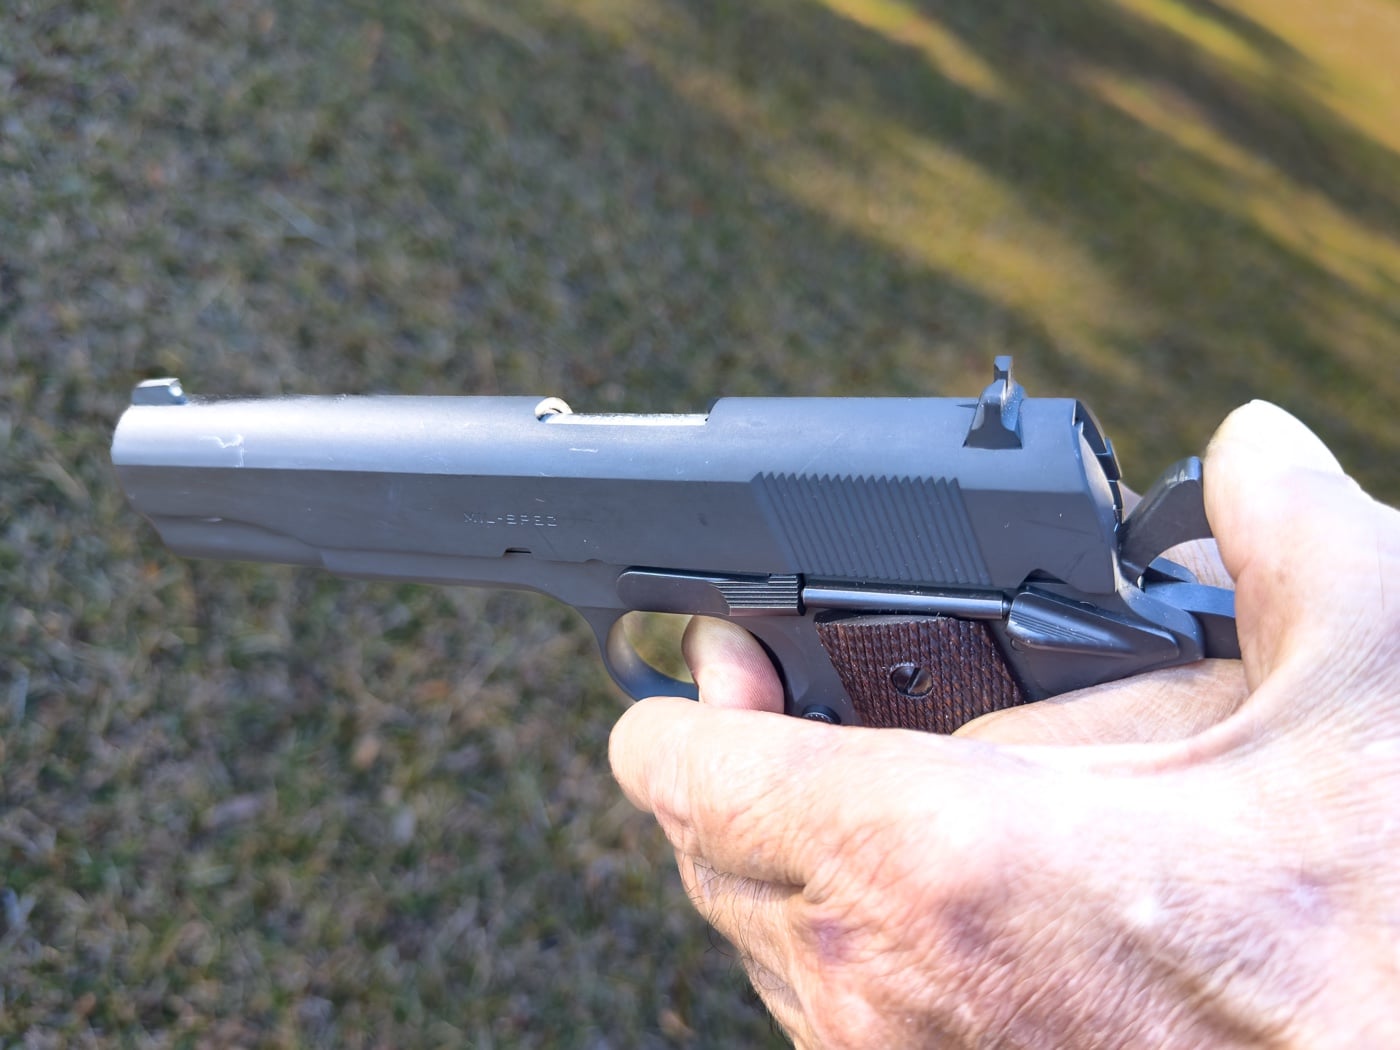 In this photo, the author shows how dangerous it is to try to lower the hammer manually on a M1911 pistol. It would be extremely easy for the weapon owner's thumb to slip off of the hammer and the firing pin strike the primer of the cartridge in the chamber of the handgun. This is not a fail-safe situation and runs the possibility of injury from an unintentional discharge. 